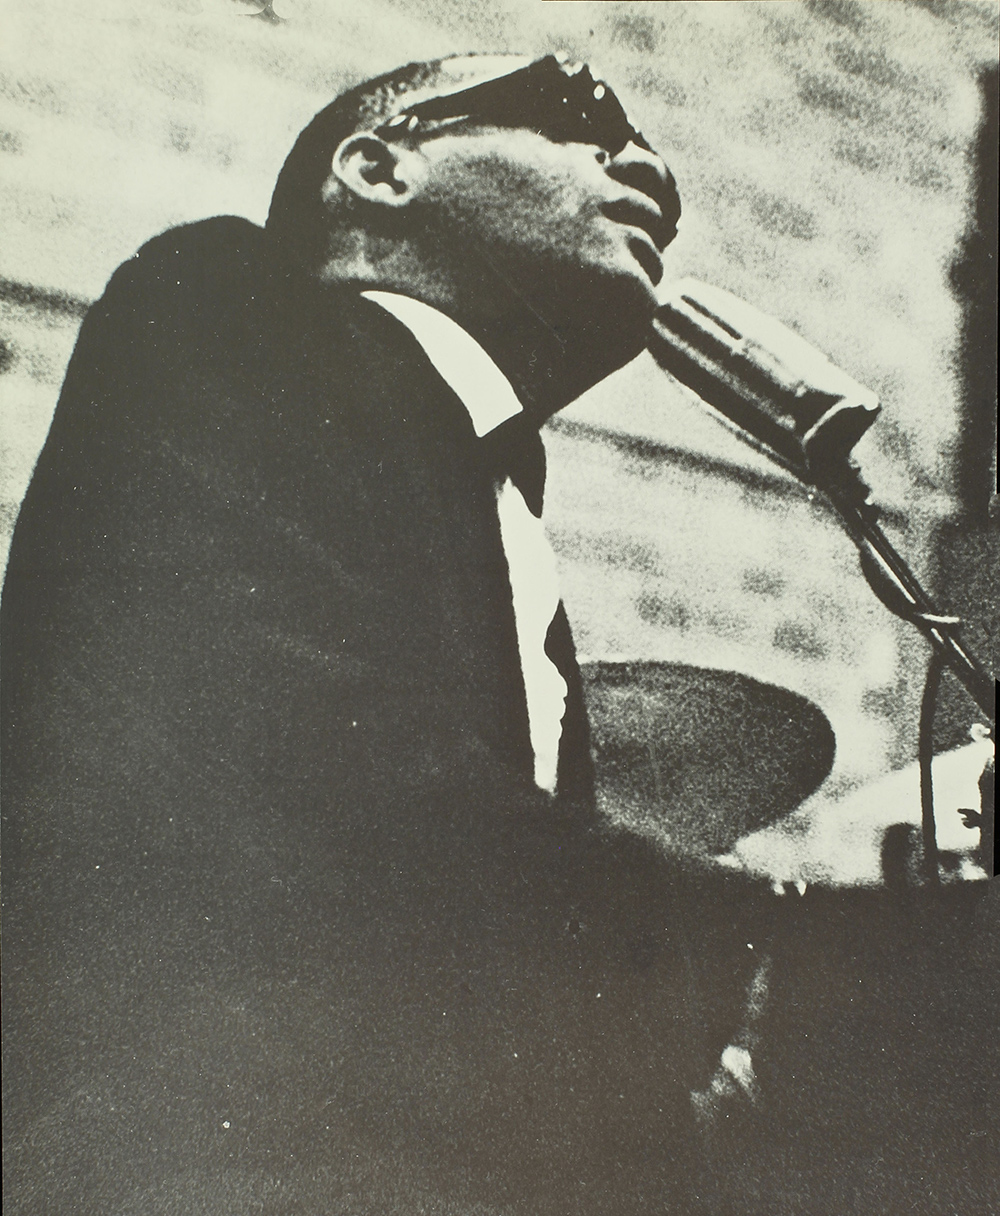 archival photo of Ray Charles singing at the piano.